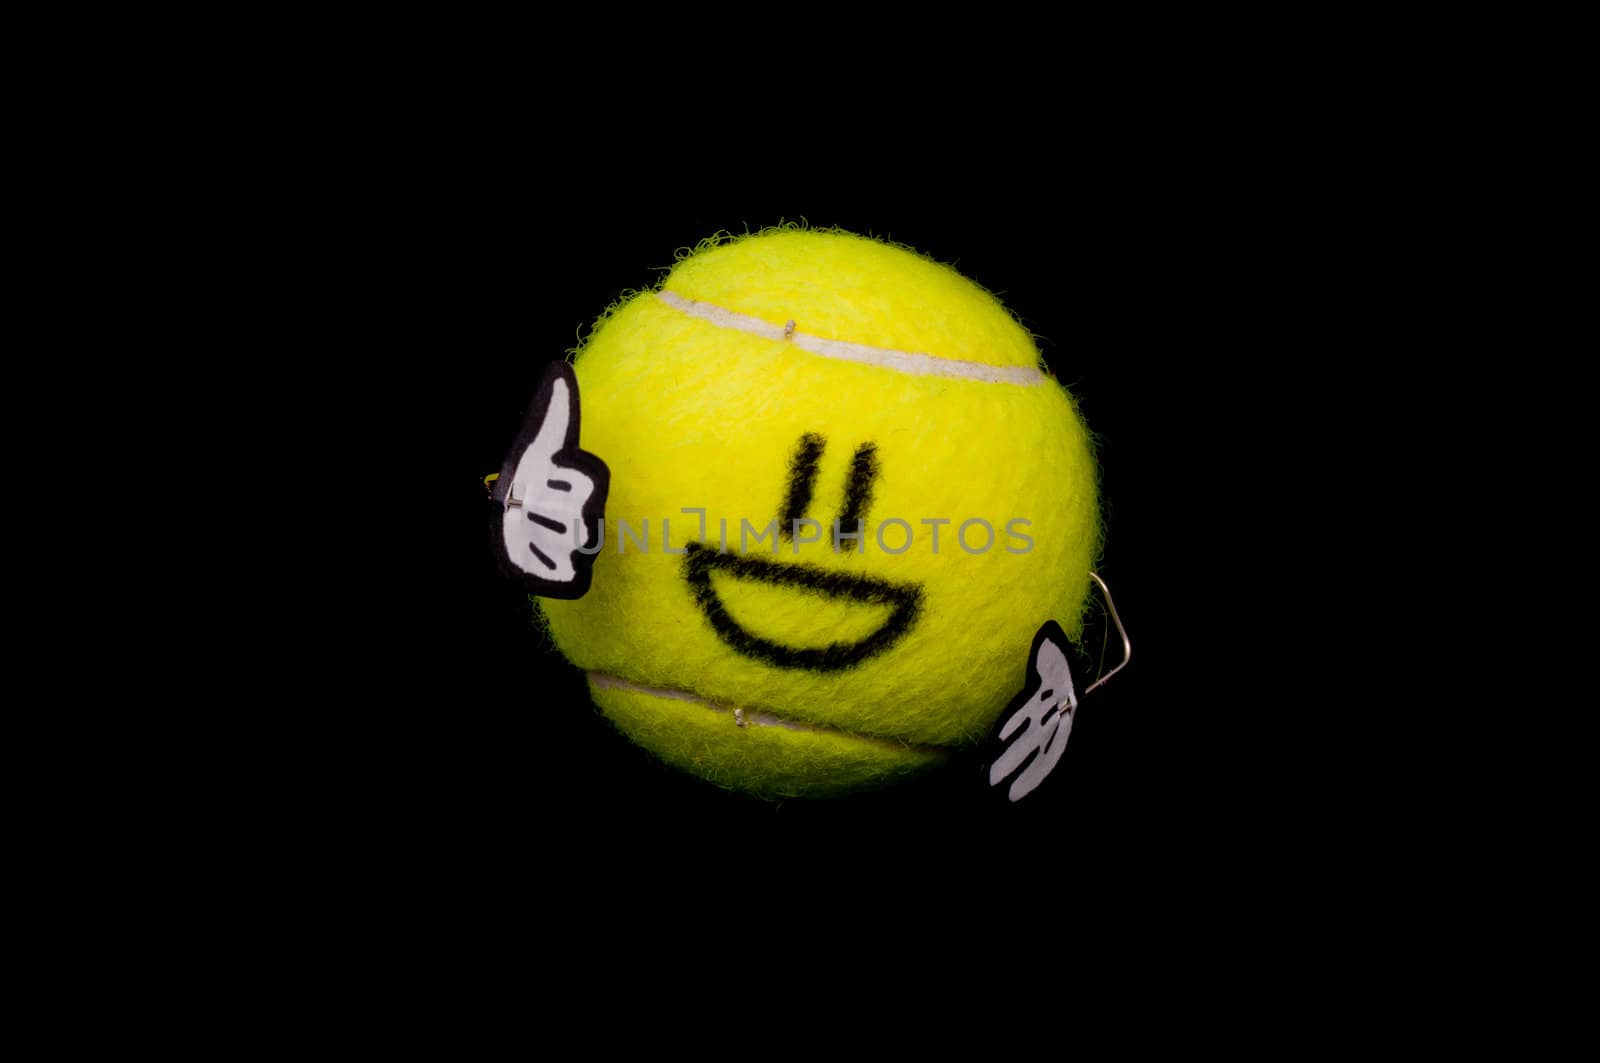 Cute ball shows the thumb and smiles a lot